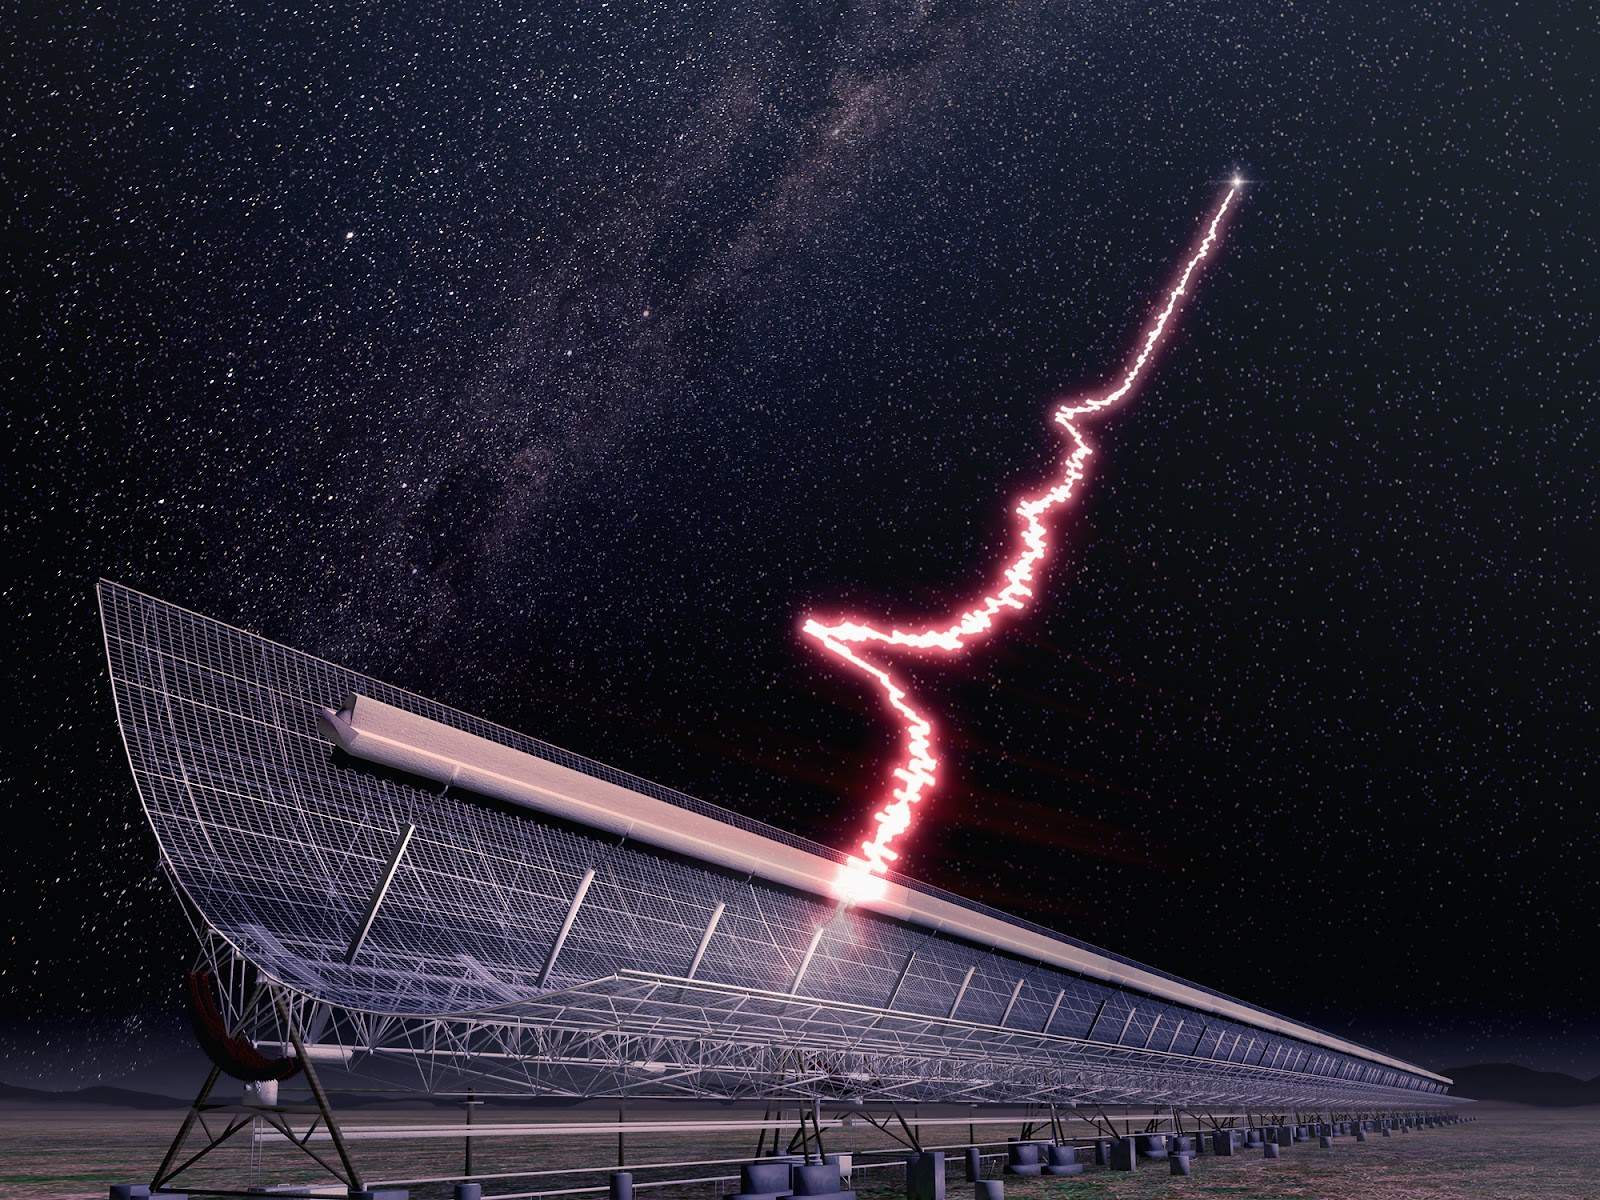 "An artists interpretation of an FRB being detected at the Molonglo Radio Telescope."